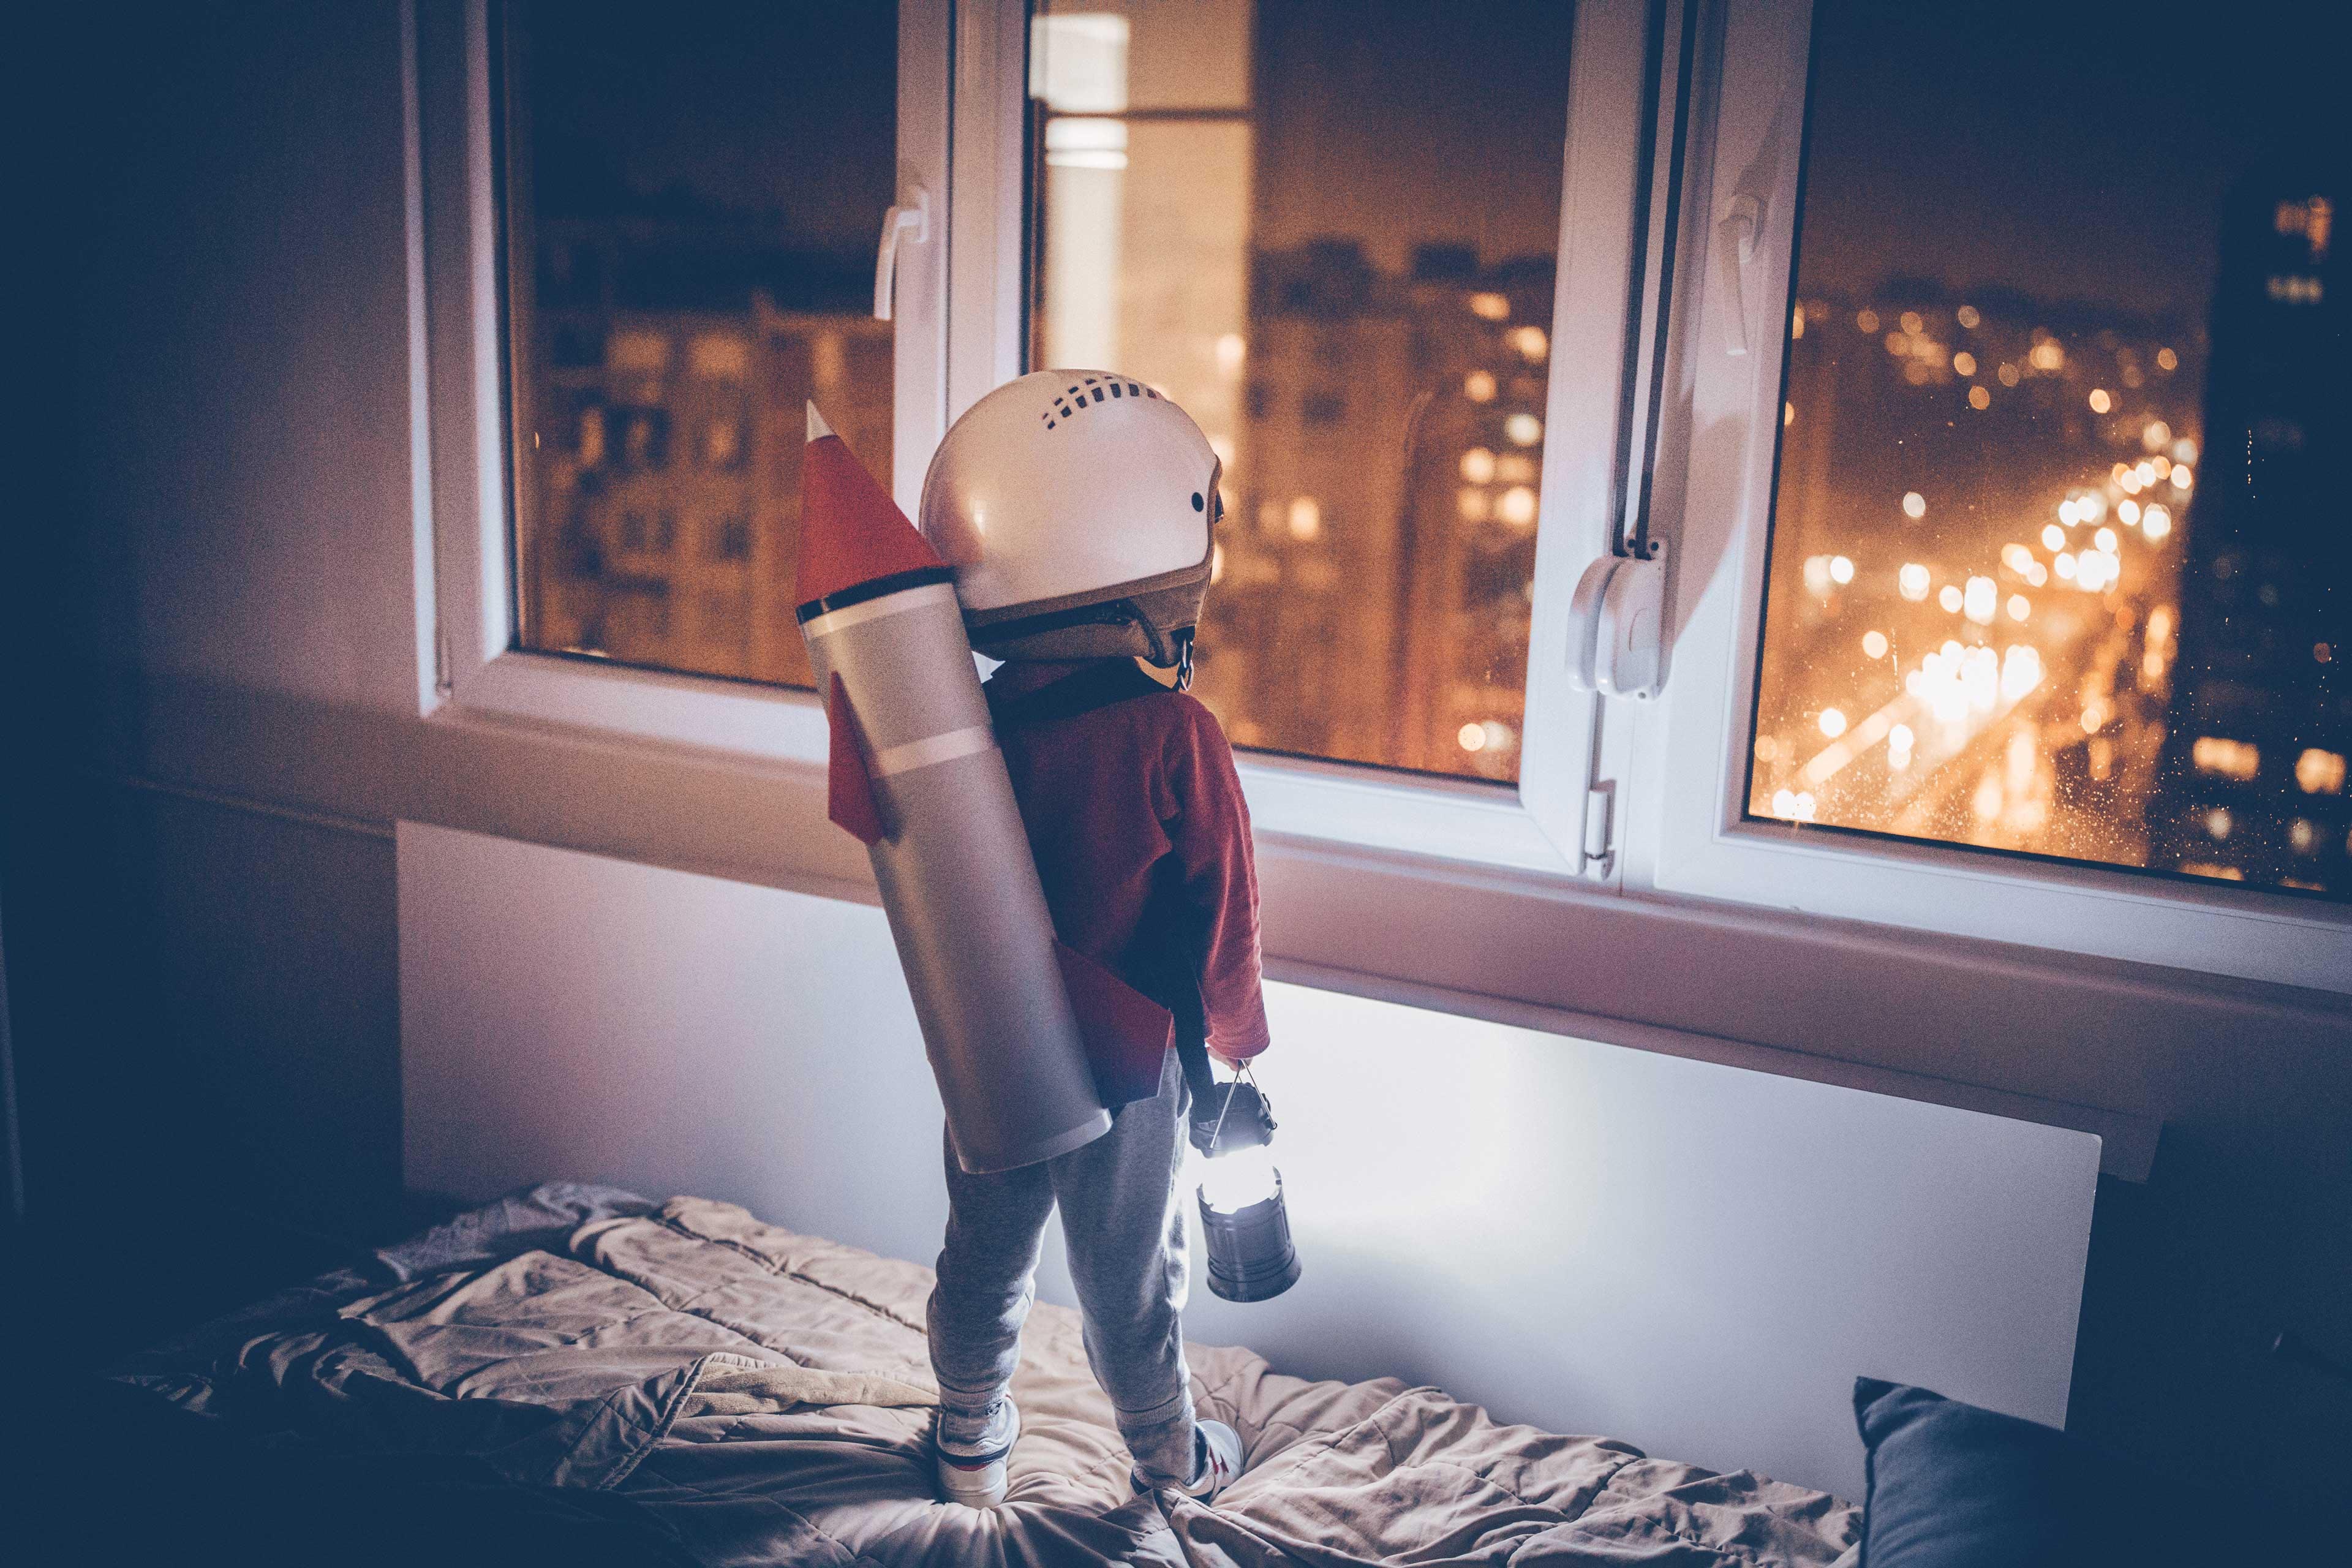 Boy wearing a rocket and standing on the bed and wishing to go to space